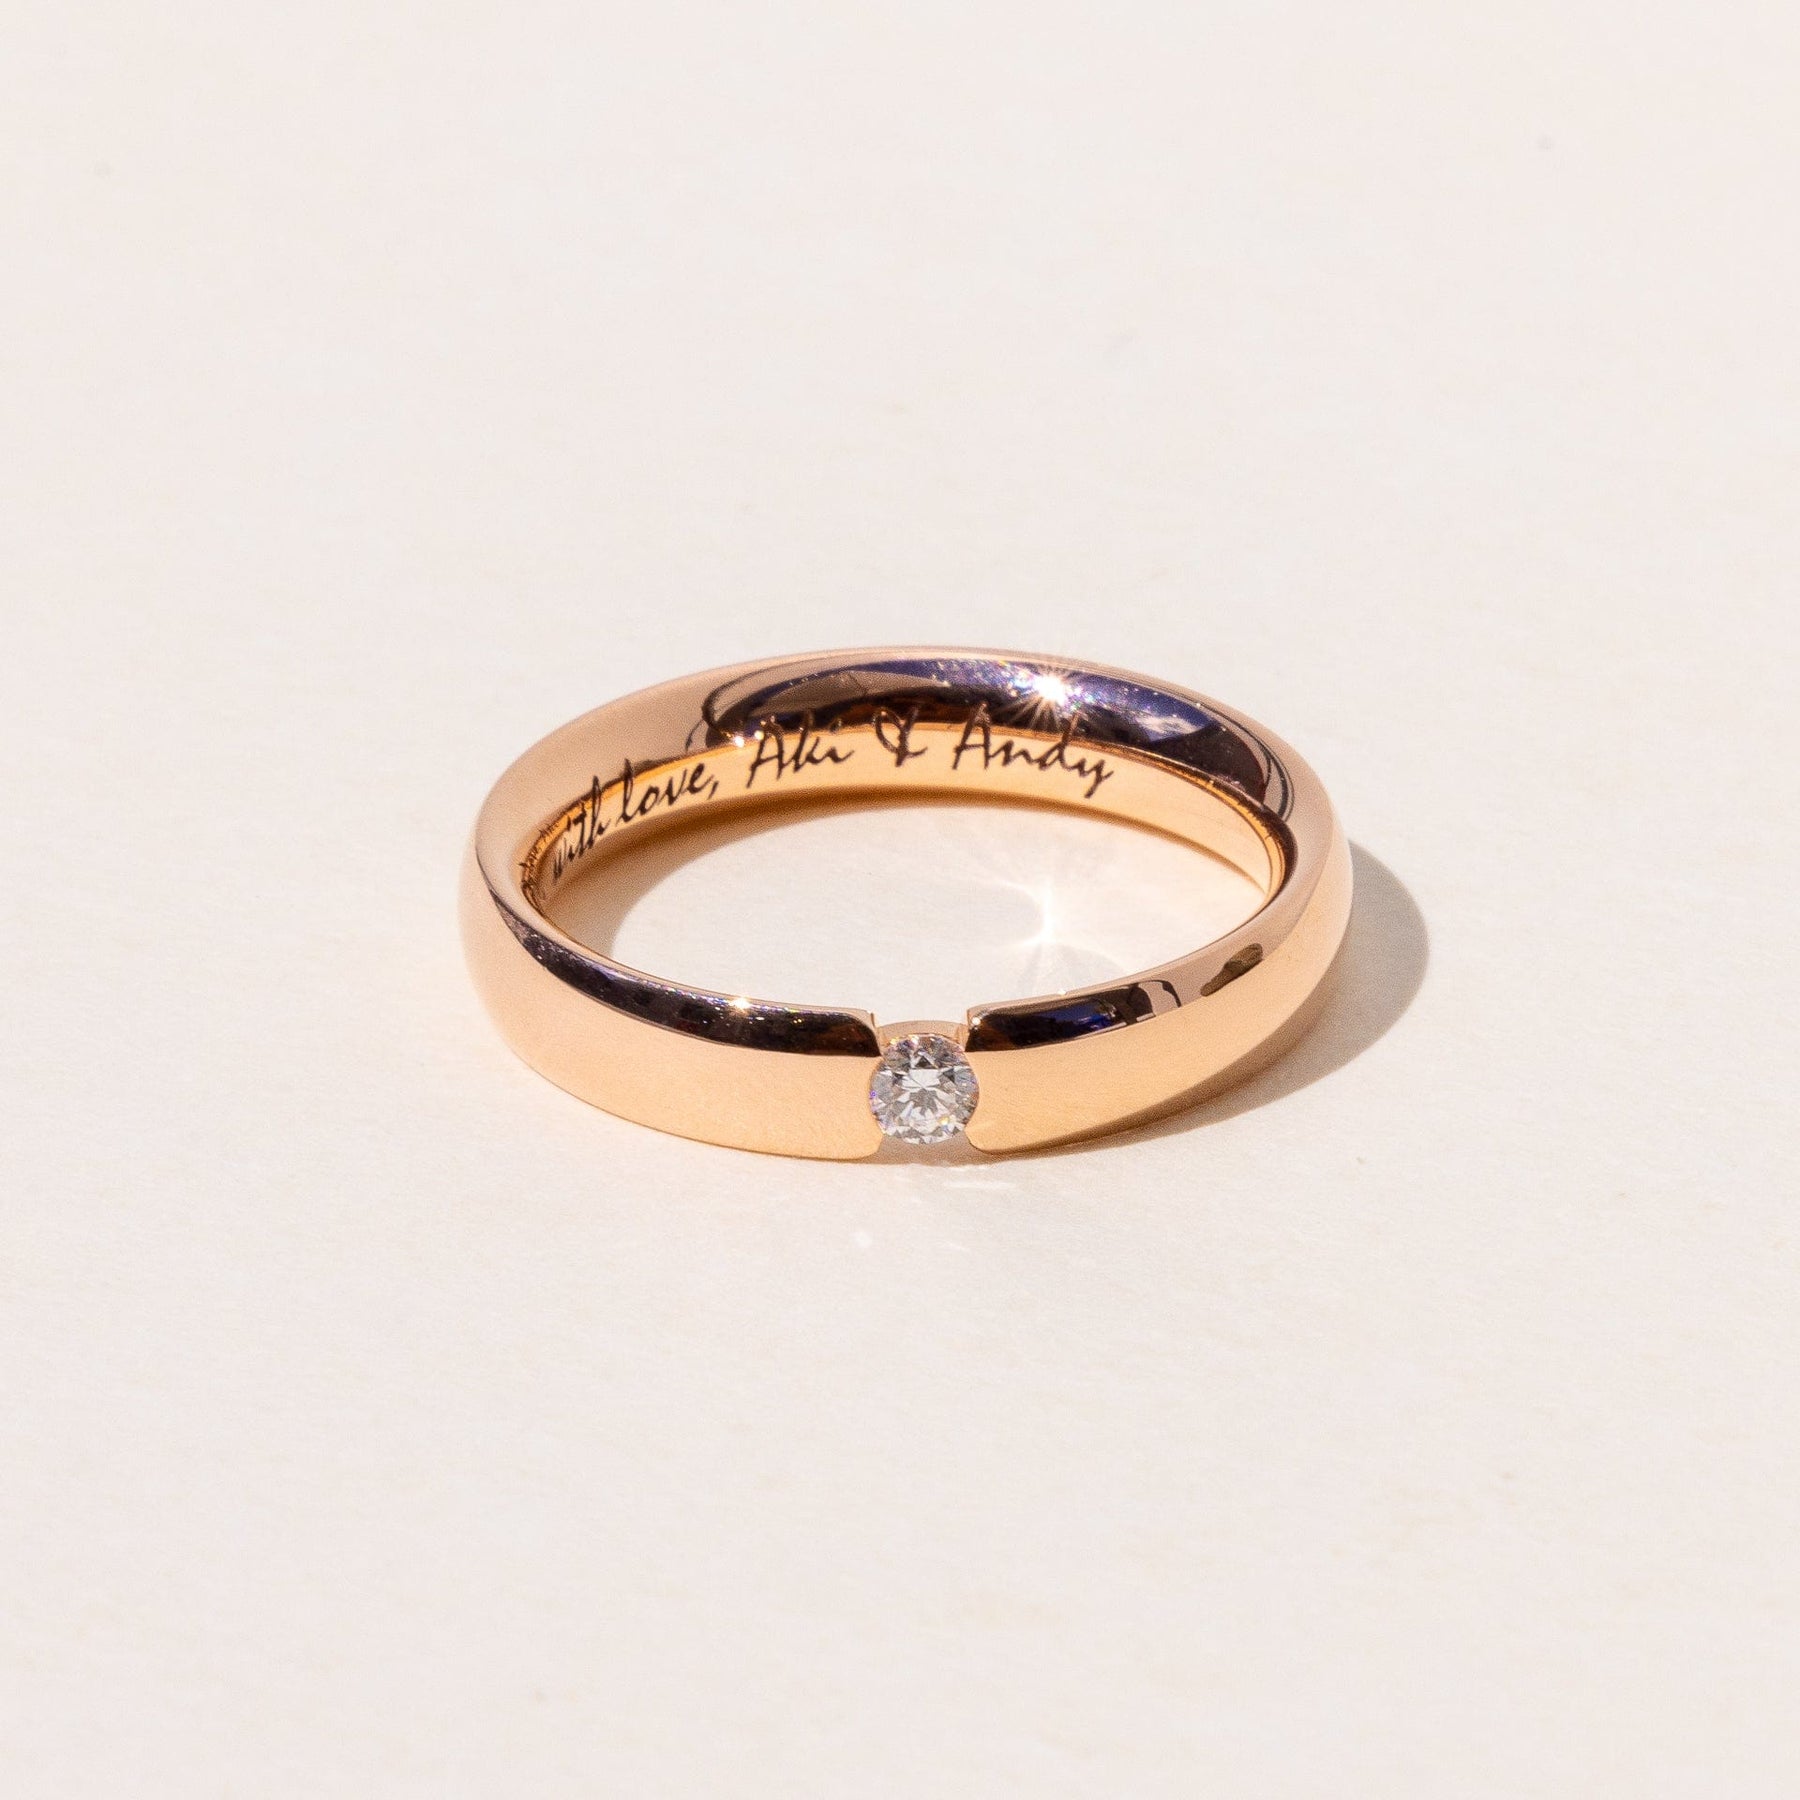 Custom Design Rose Gold Diamond Band Ring made by Meaden Master Jewellers